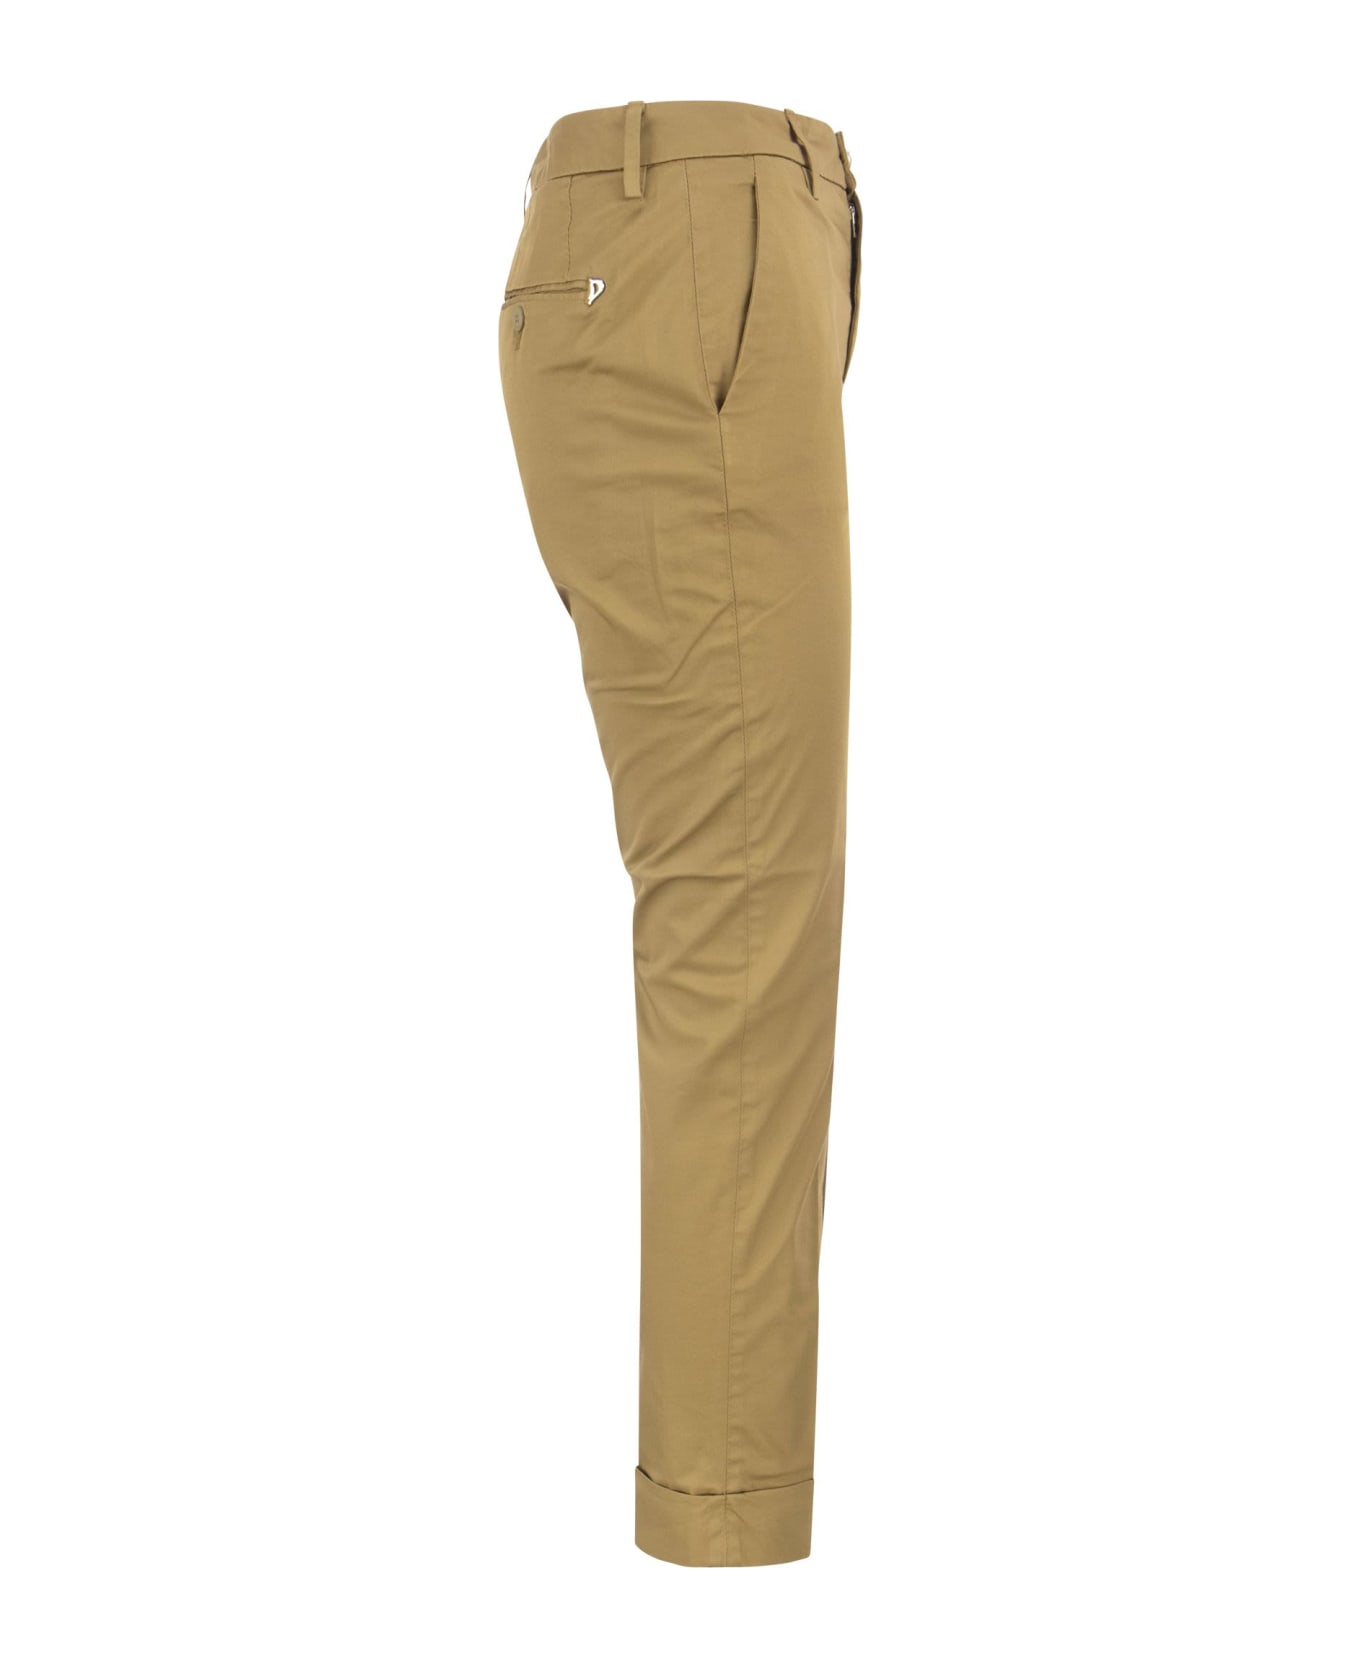 Dondup Erin - Slim Cotton Trousers - Tobacco ボトムス